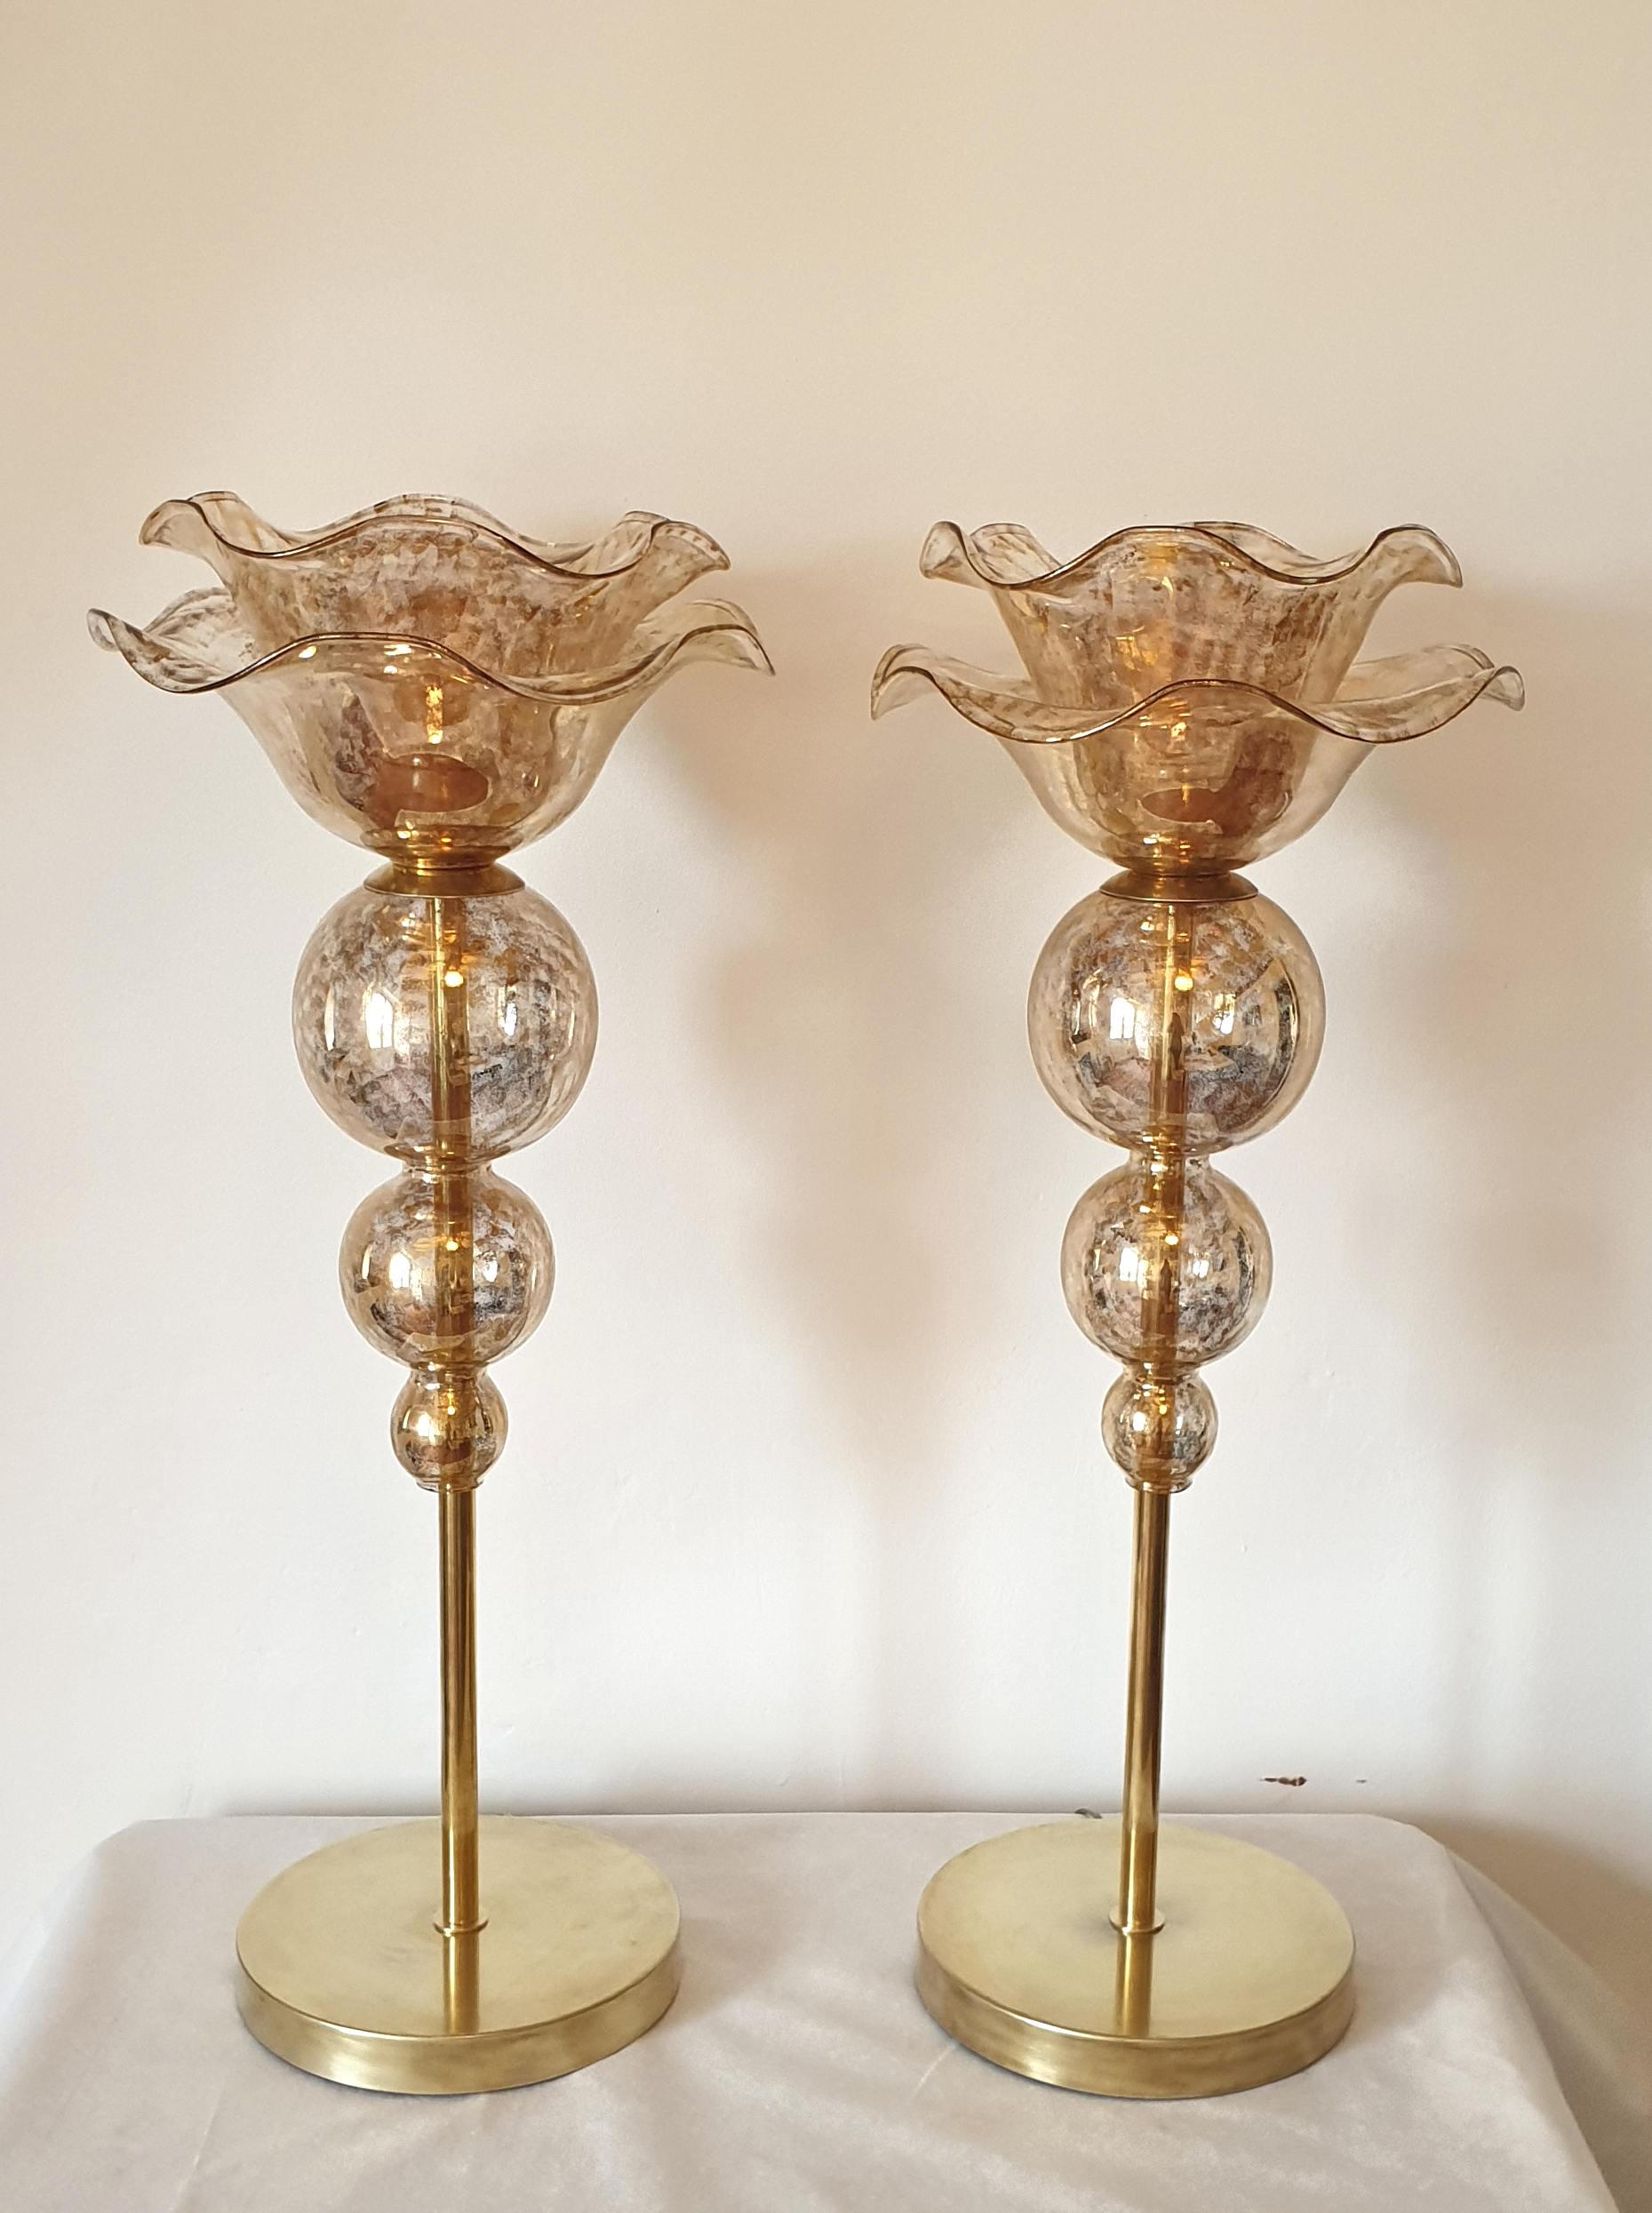 Large pair of Mid-Century Modern lotus flower Murano glass table or desk lamps, attributed to Seguso, Italy, 1960s.
Hand blown glass, beige with gold leaf accents. Brass mounts.
1 light each, rewired for the US.
A translucent effect and warm